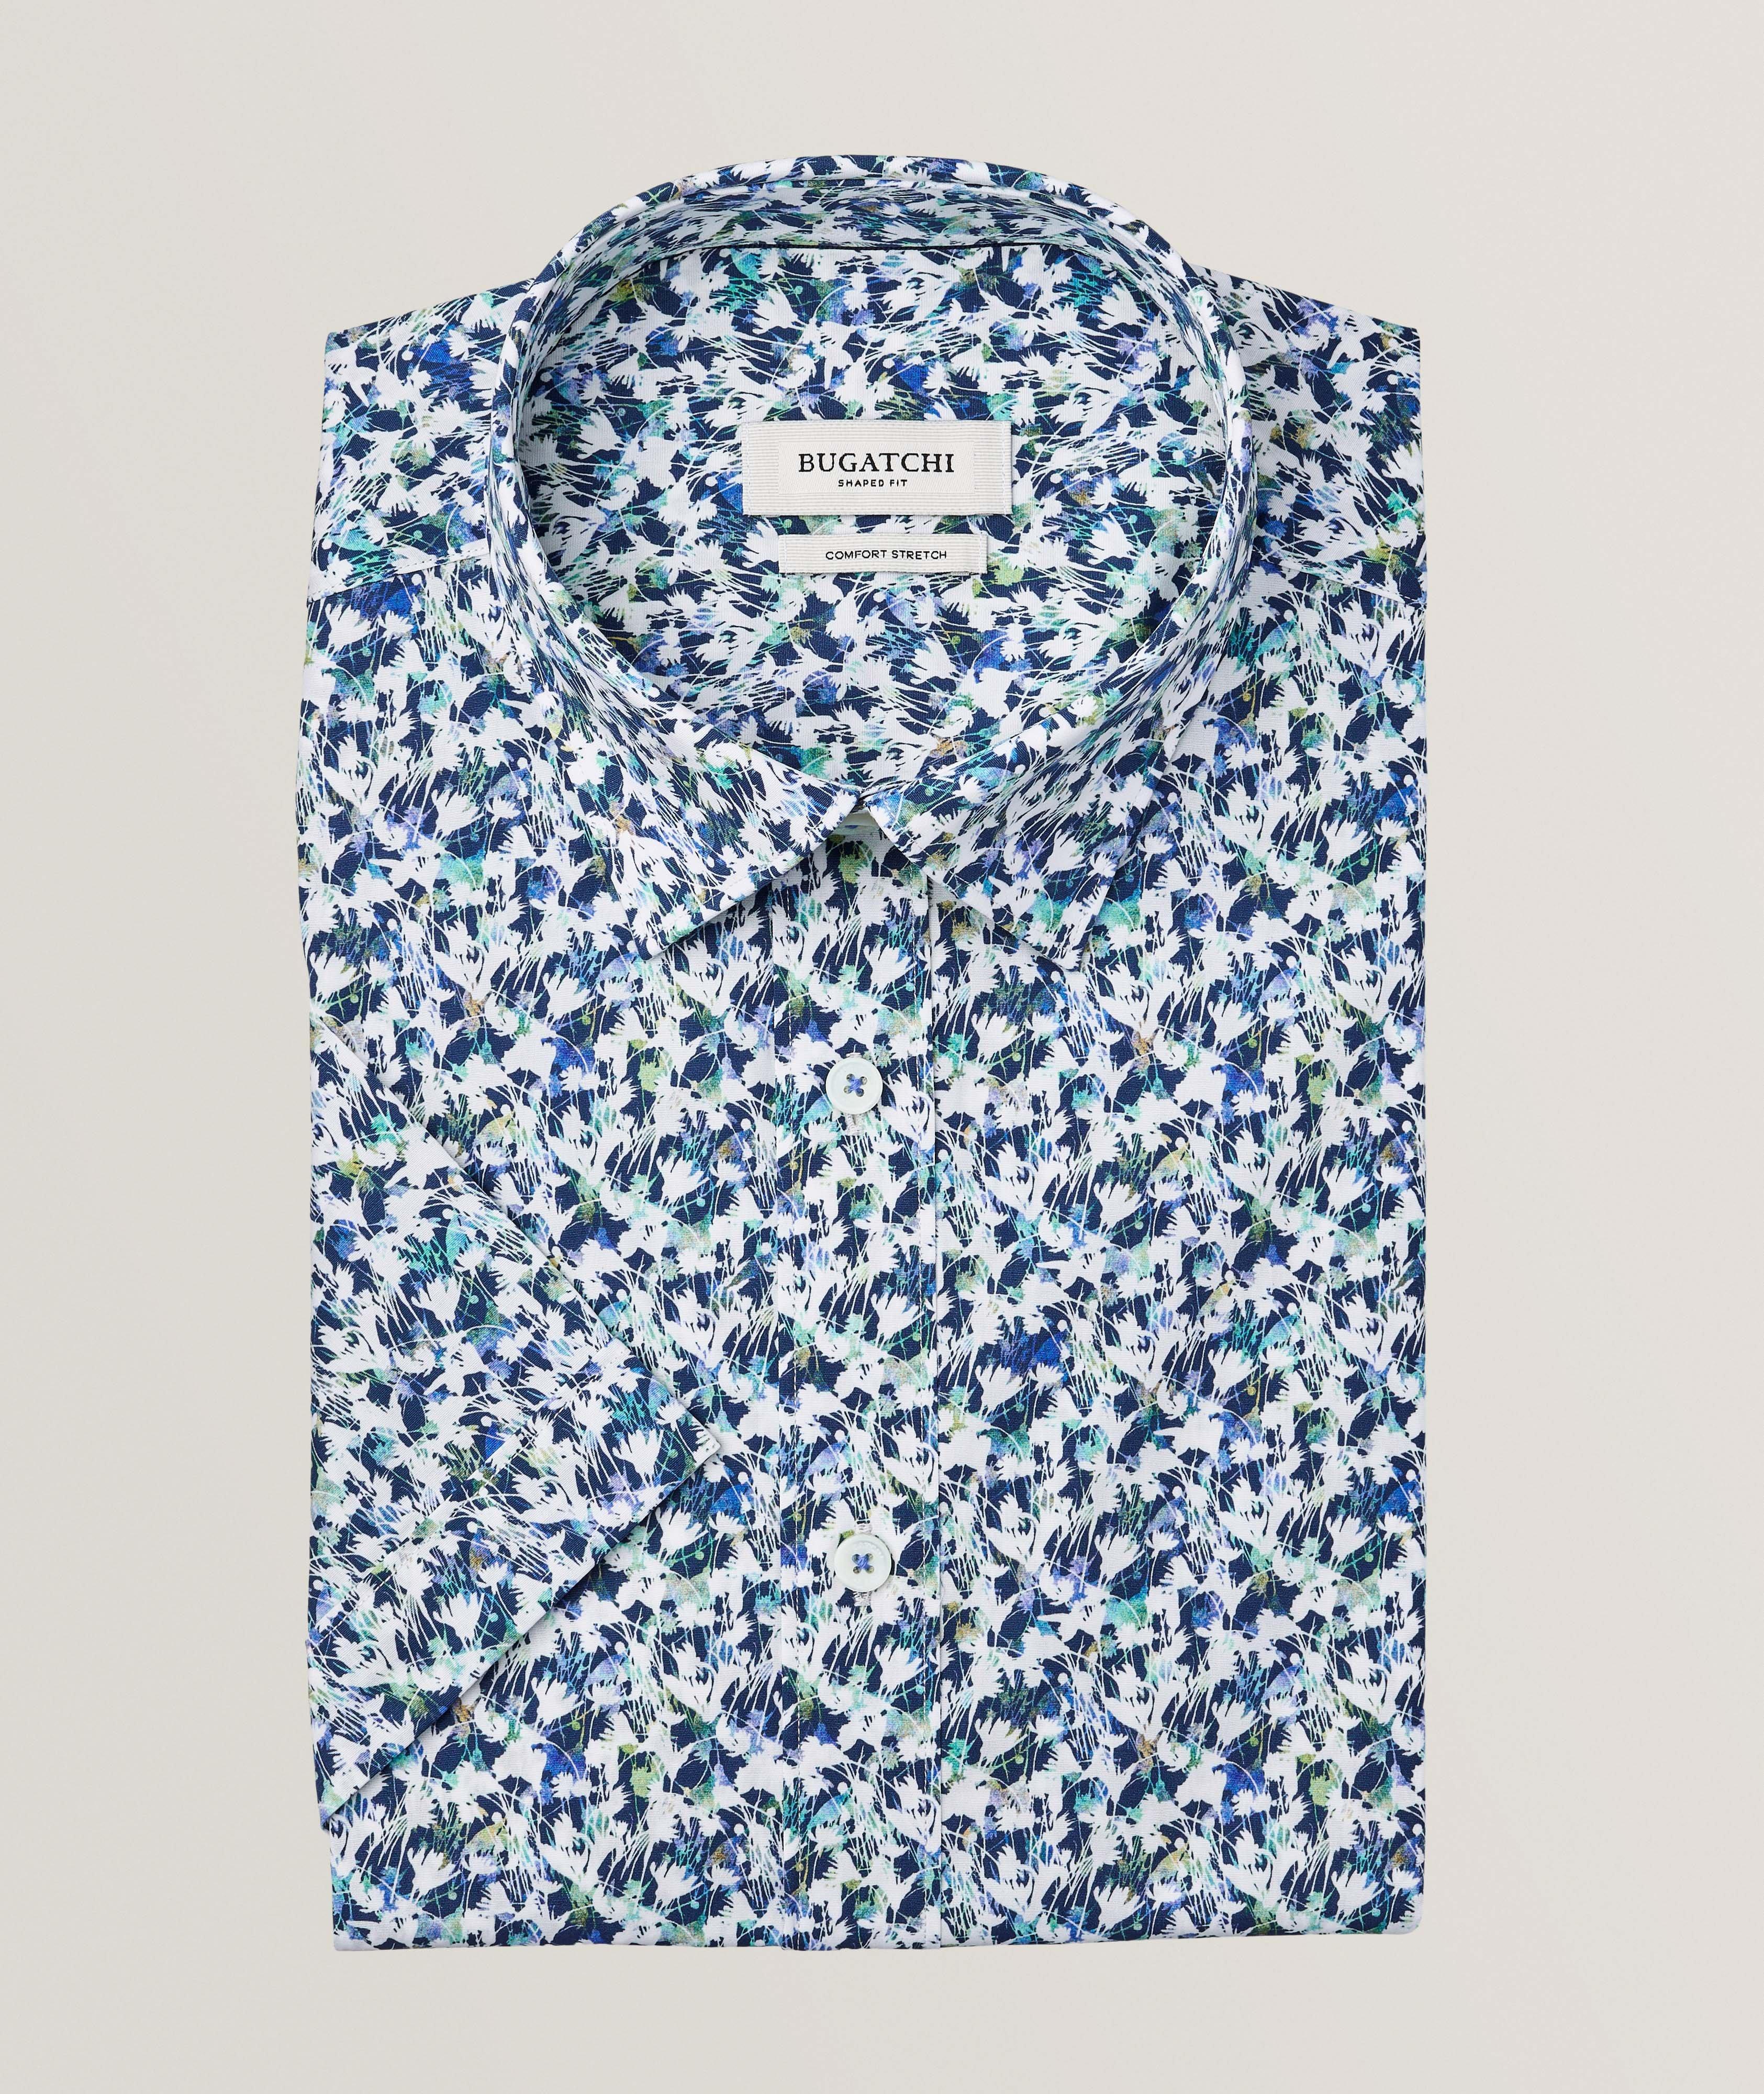 Abstract Flower Comfort Stretch Shirt  image 0